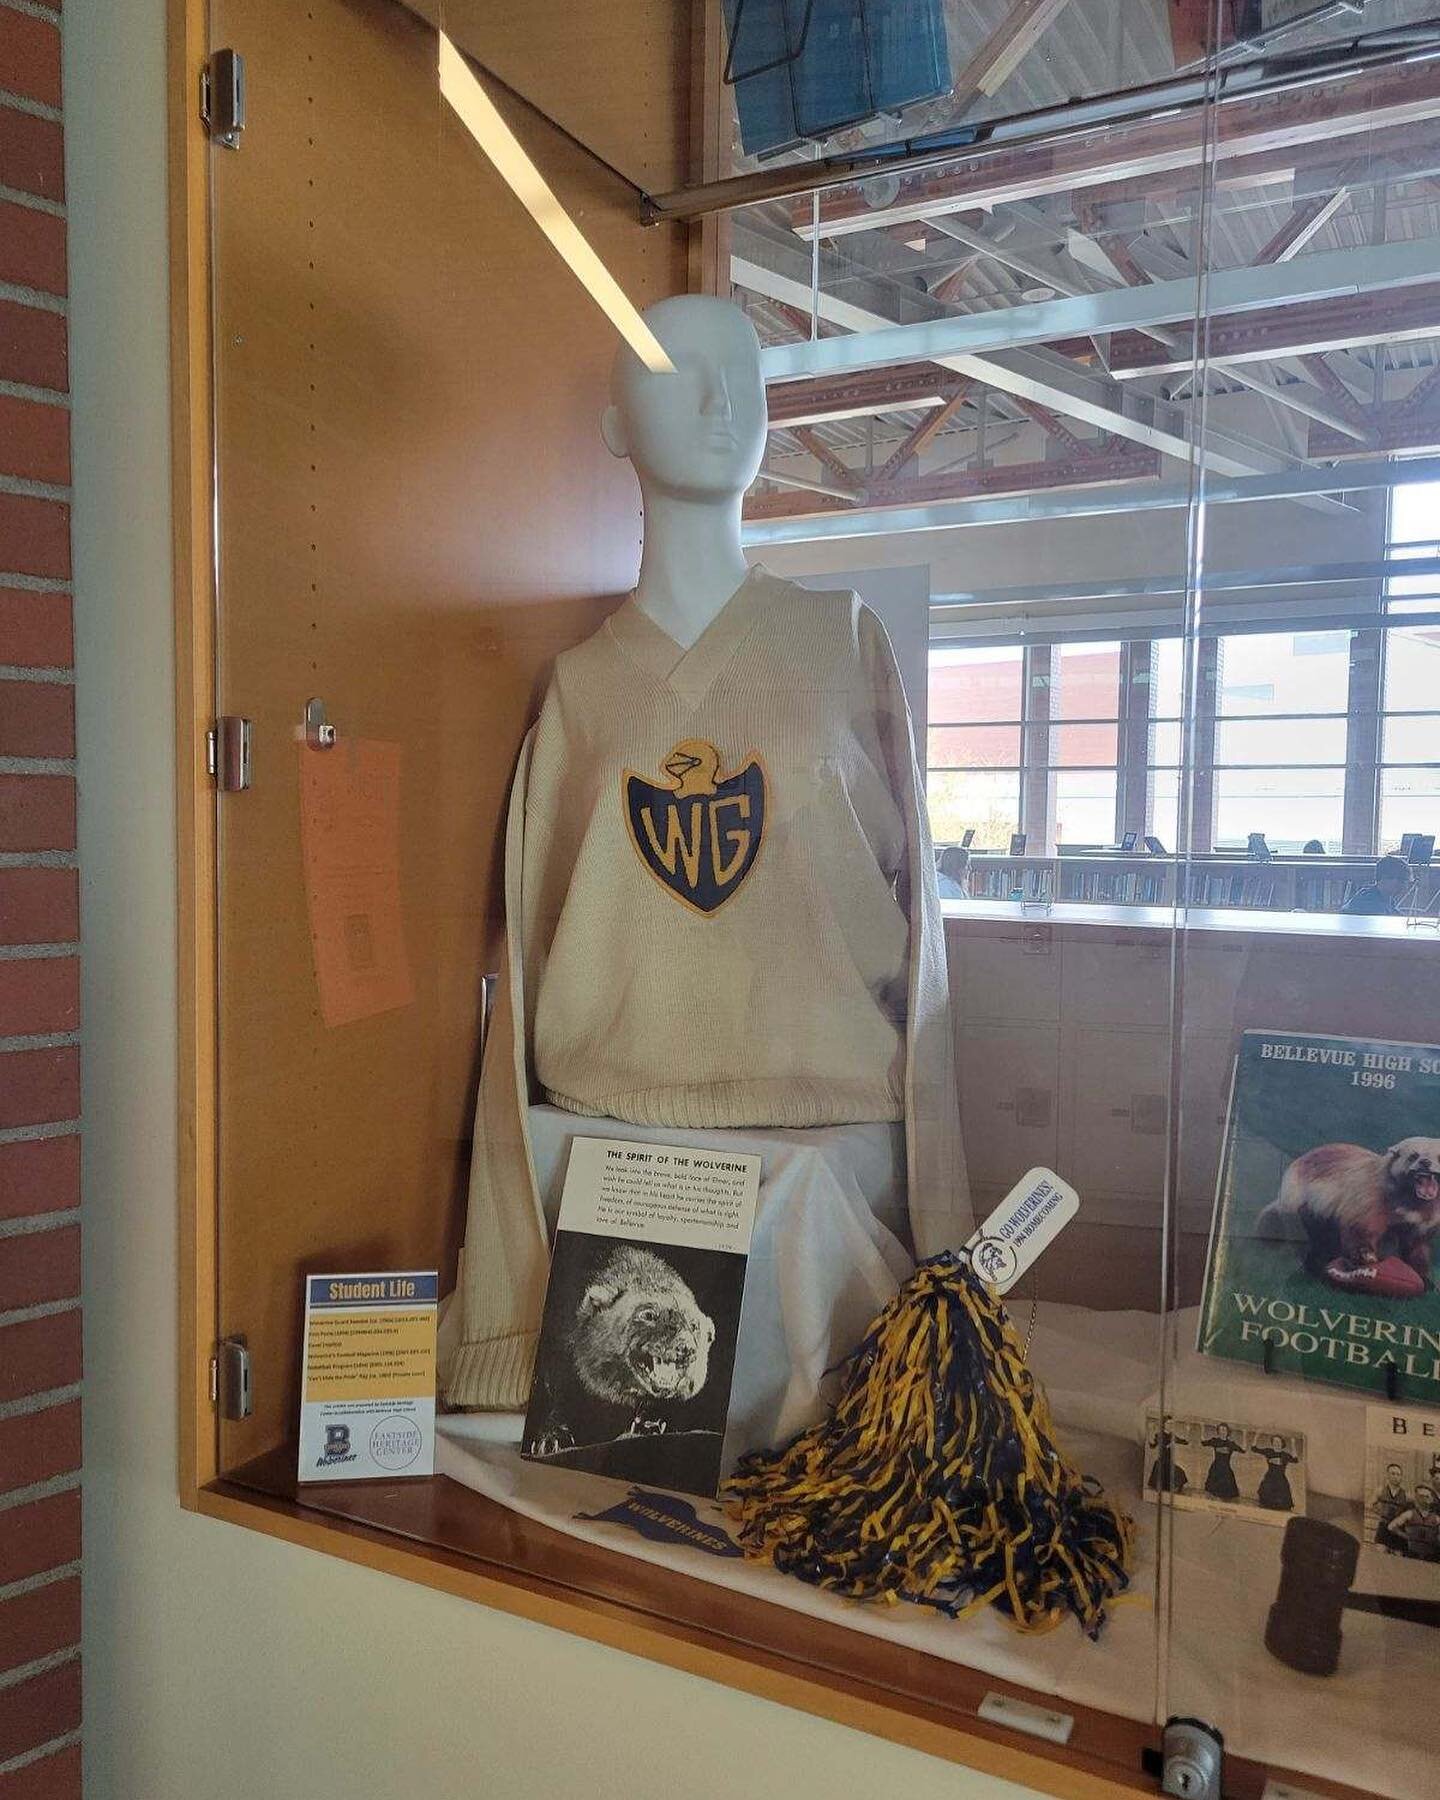 Did you know that Bellevue High School is celebrating their centennial this year? We recently installed an exhibition highlighting pieces from our collection that are from BHS over the years.

We will be part of their celebration in the fall as a com